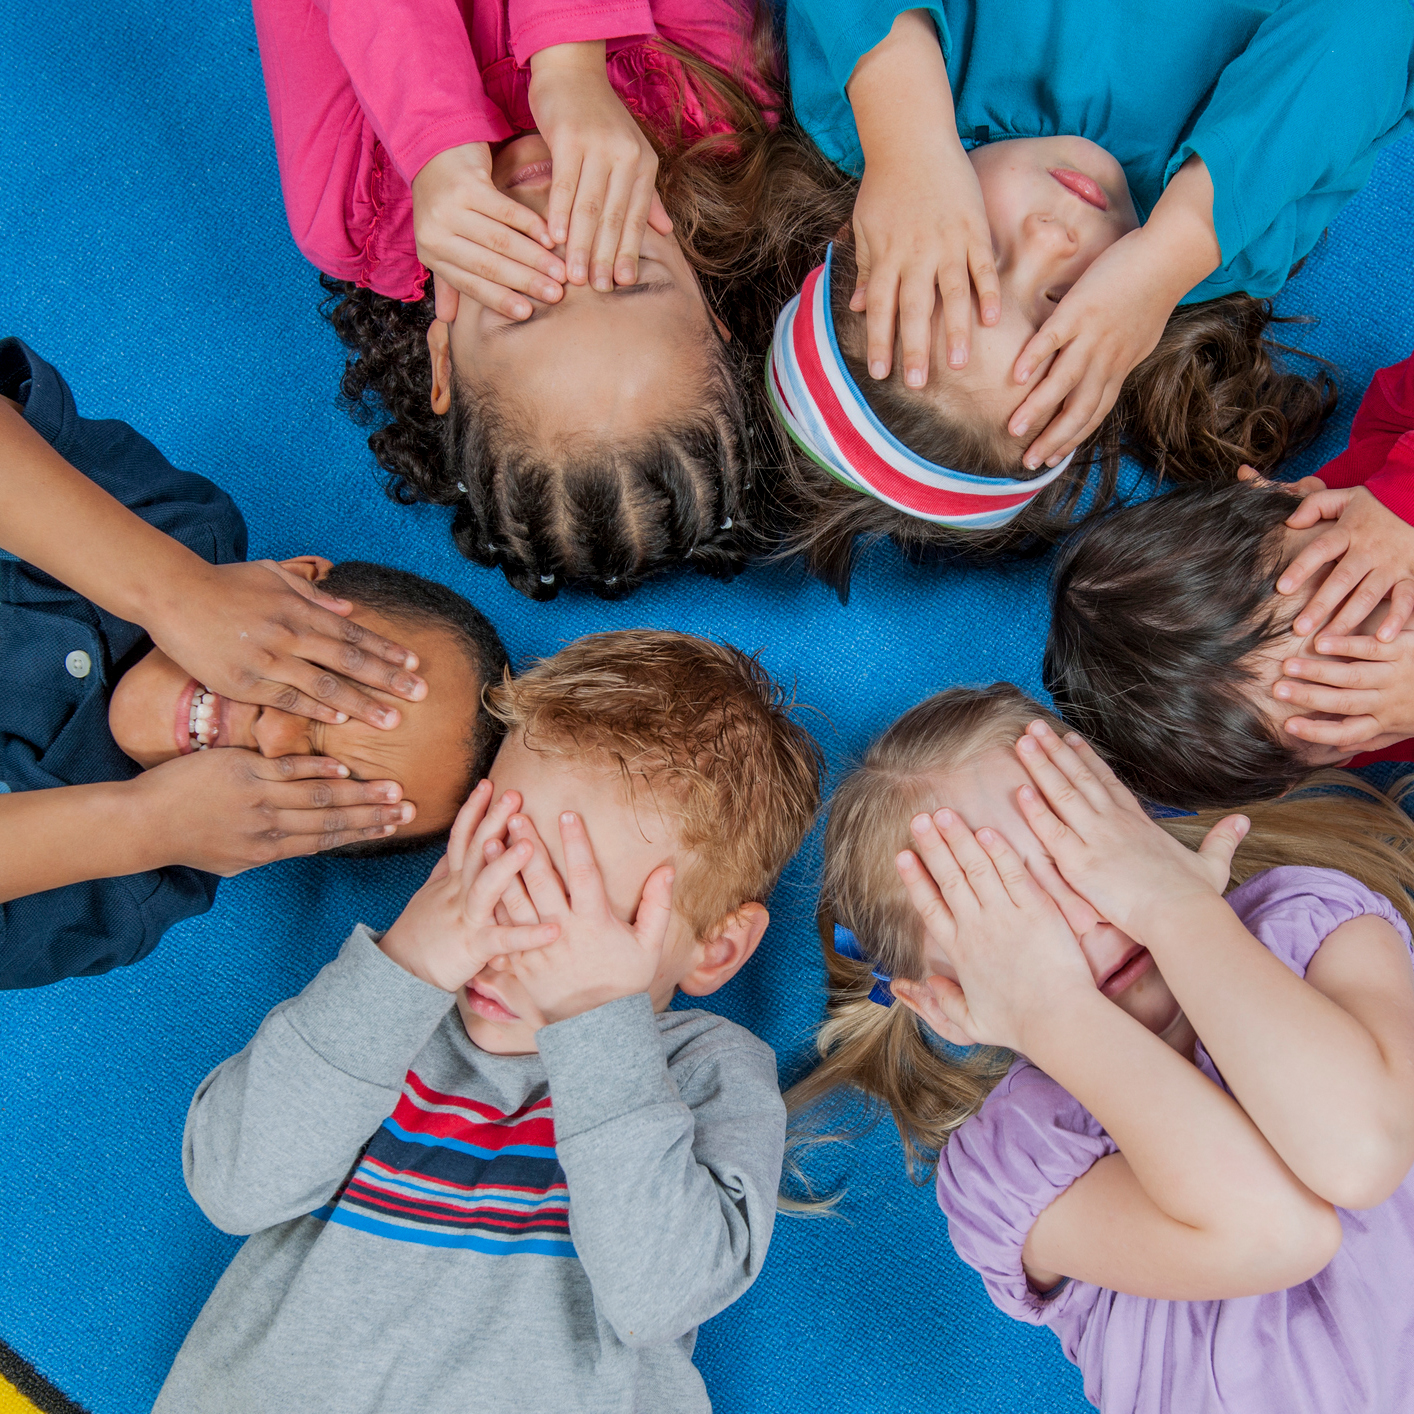 Six diverse young children covering their eyes.